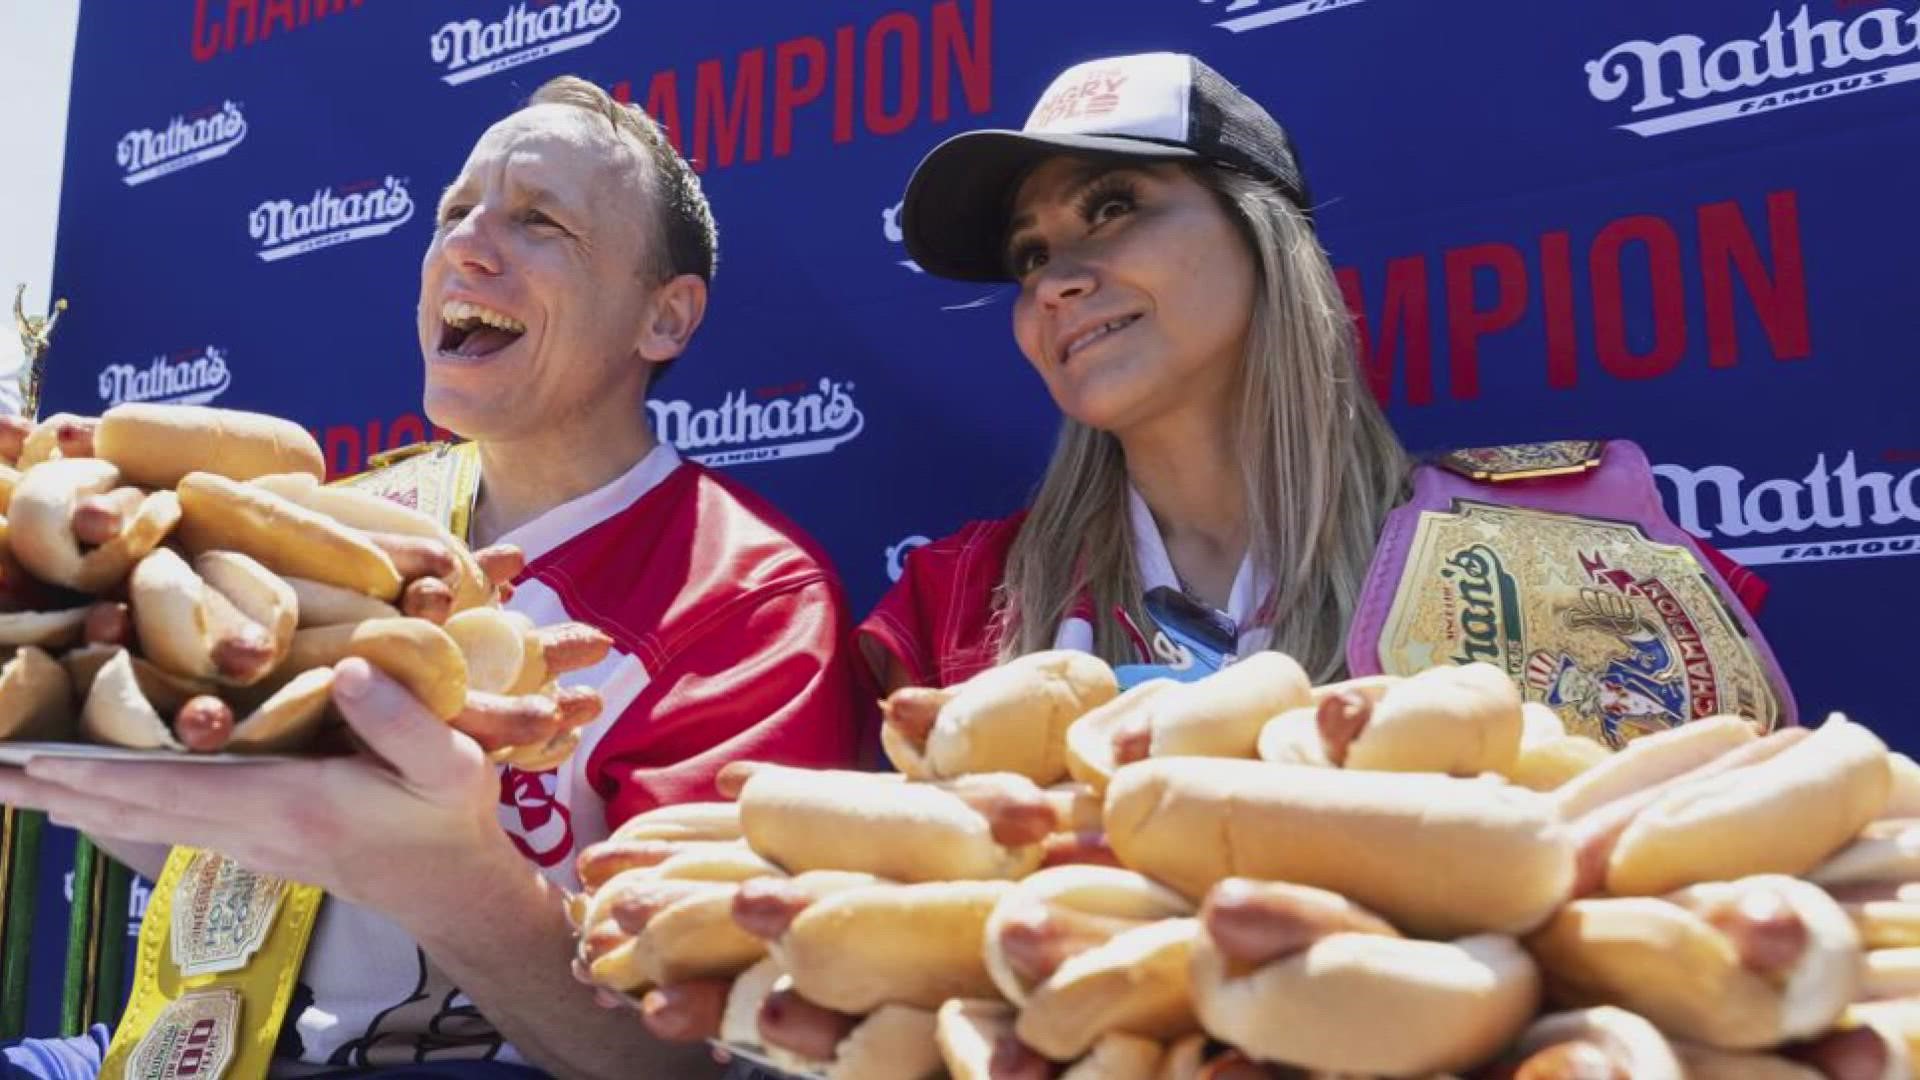 Chestnut downed 63 hot dogs in the Nathan's Famous Fourth of July contest, while Miki Sudo ate 40 hot dogs to take home the women's title.